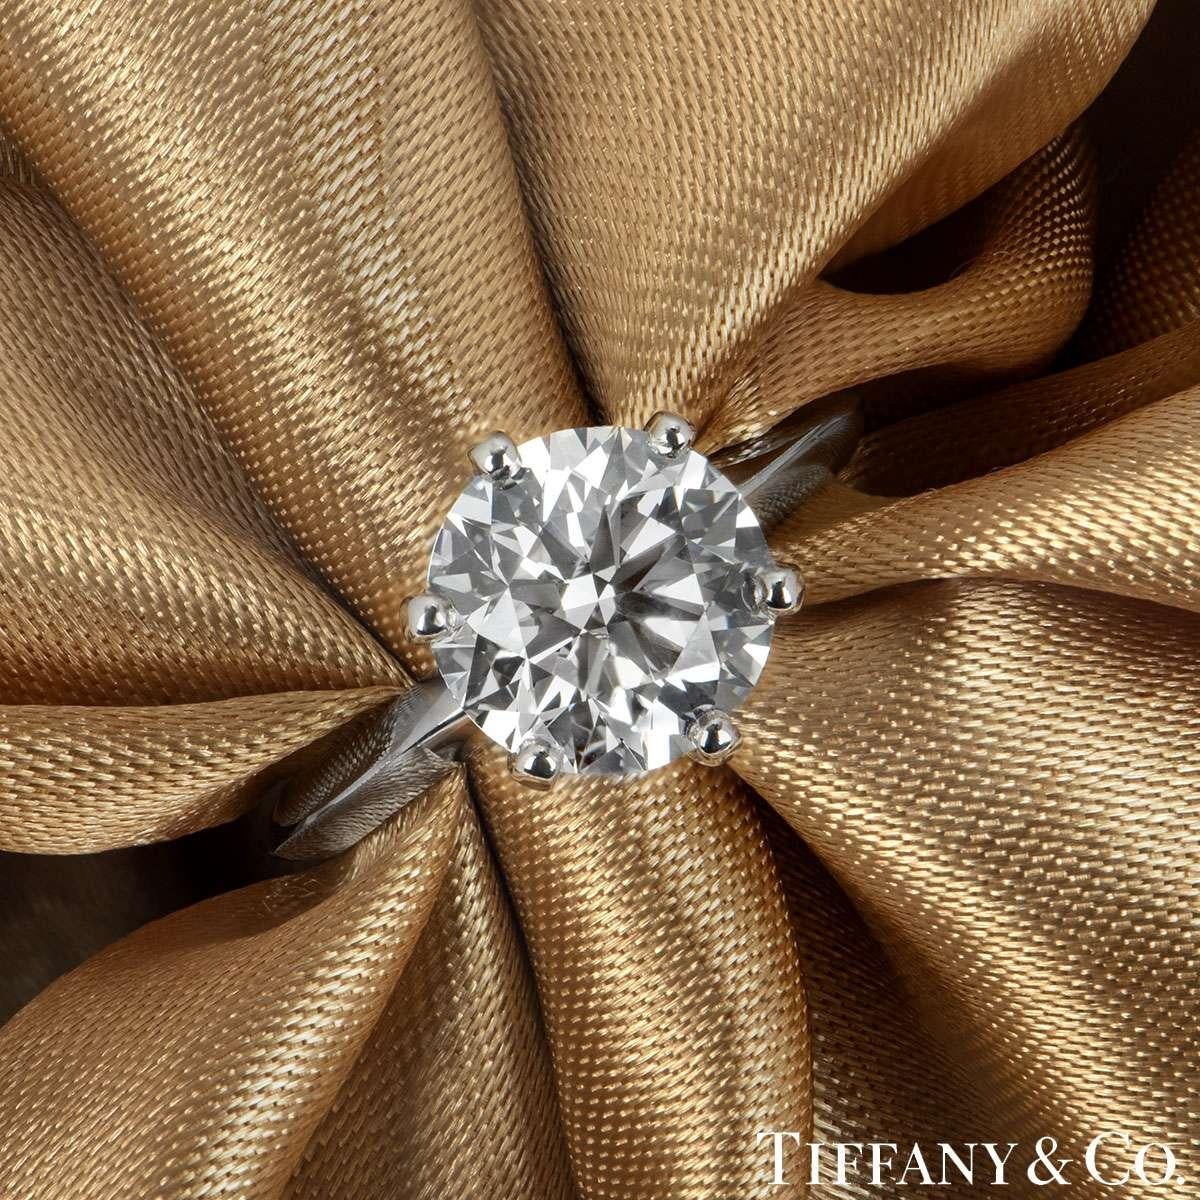 A beautiful platinum diamond ring by Tiffany & Co. from The Setting collection. The ring comprises of a round brilliant cut diamond in a 6 claw setting with a weight of 2.61ct, I colour and VS1 clarity. The diamond scores an excellent rating in all